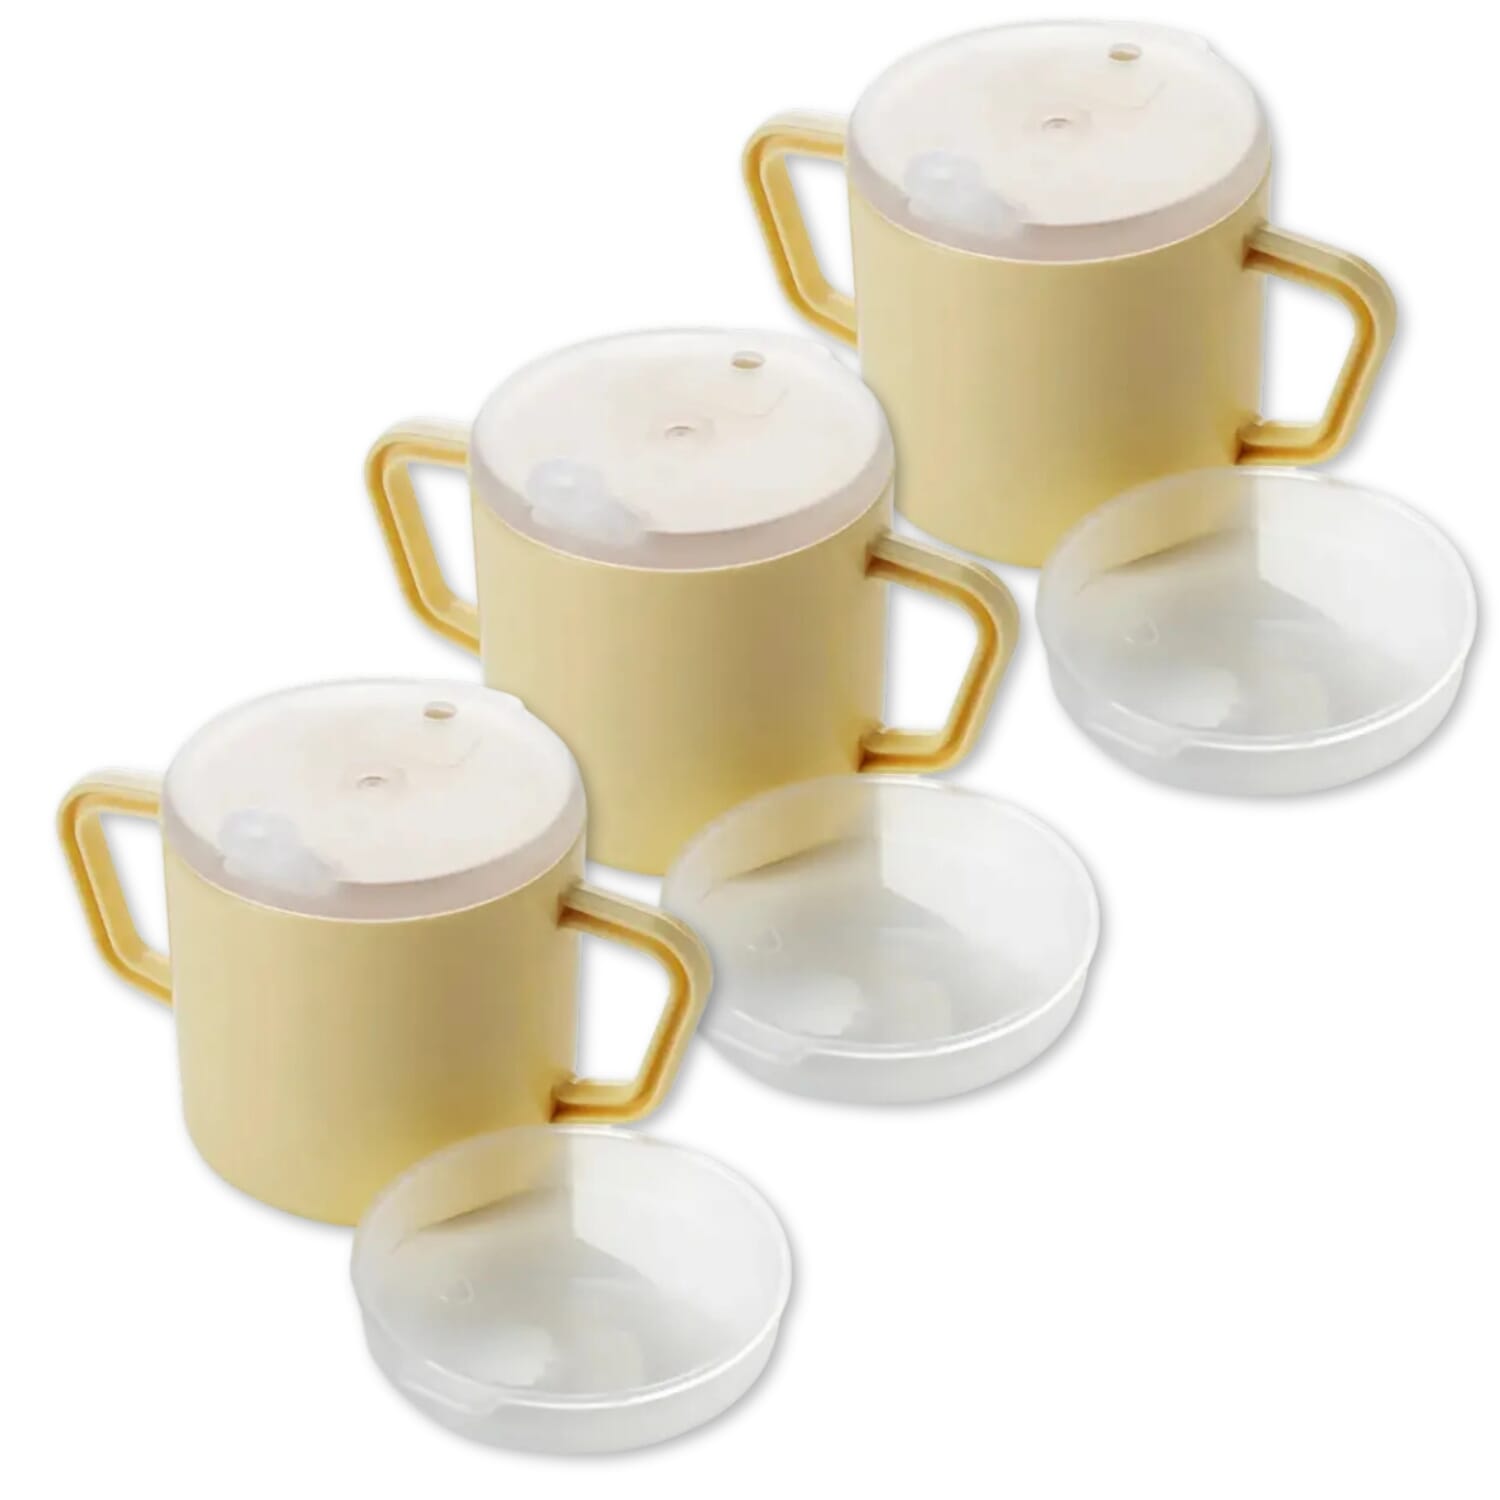 View Dual Handle Mug with Narrow Spout and Feeder Lid Pack of 3 information